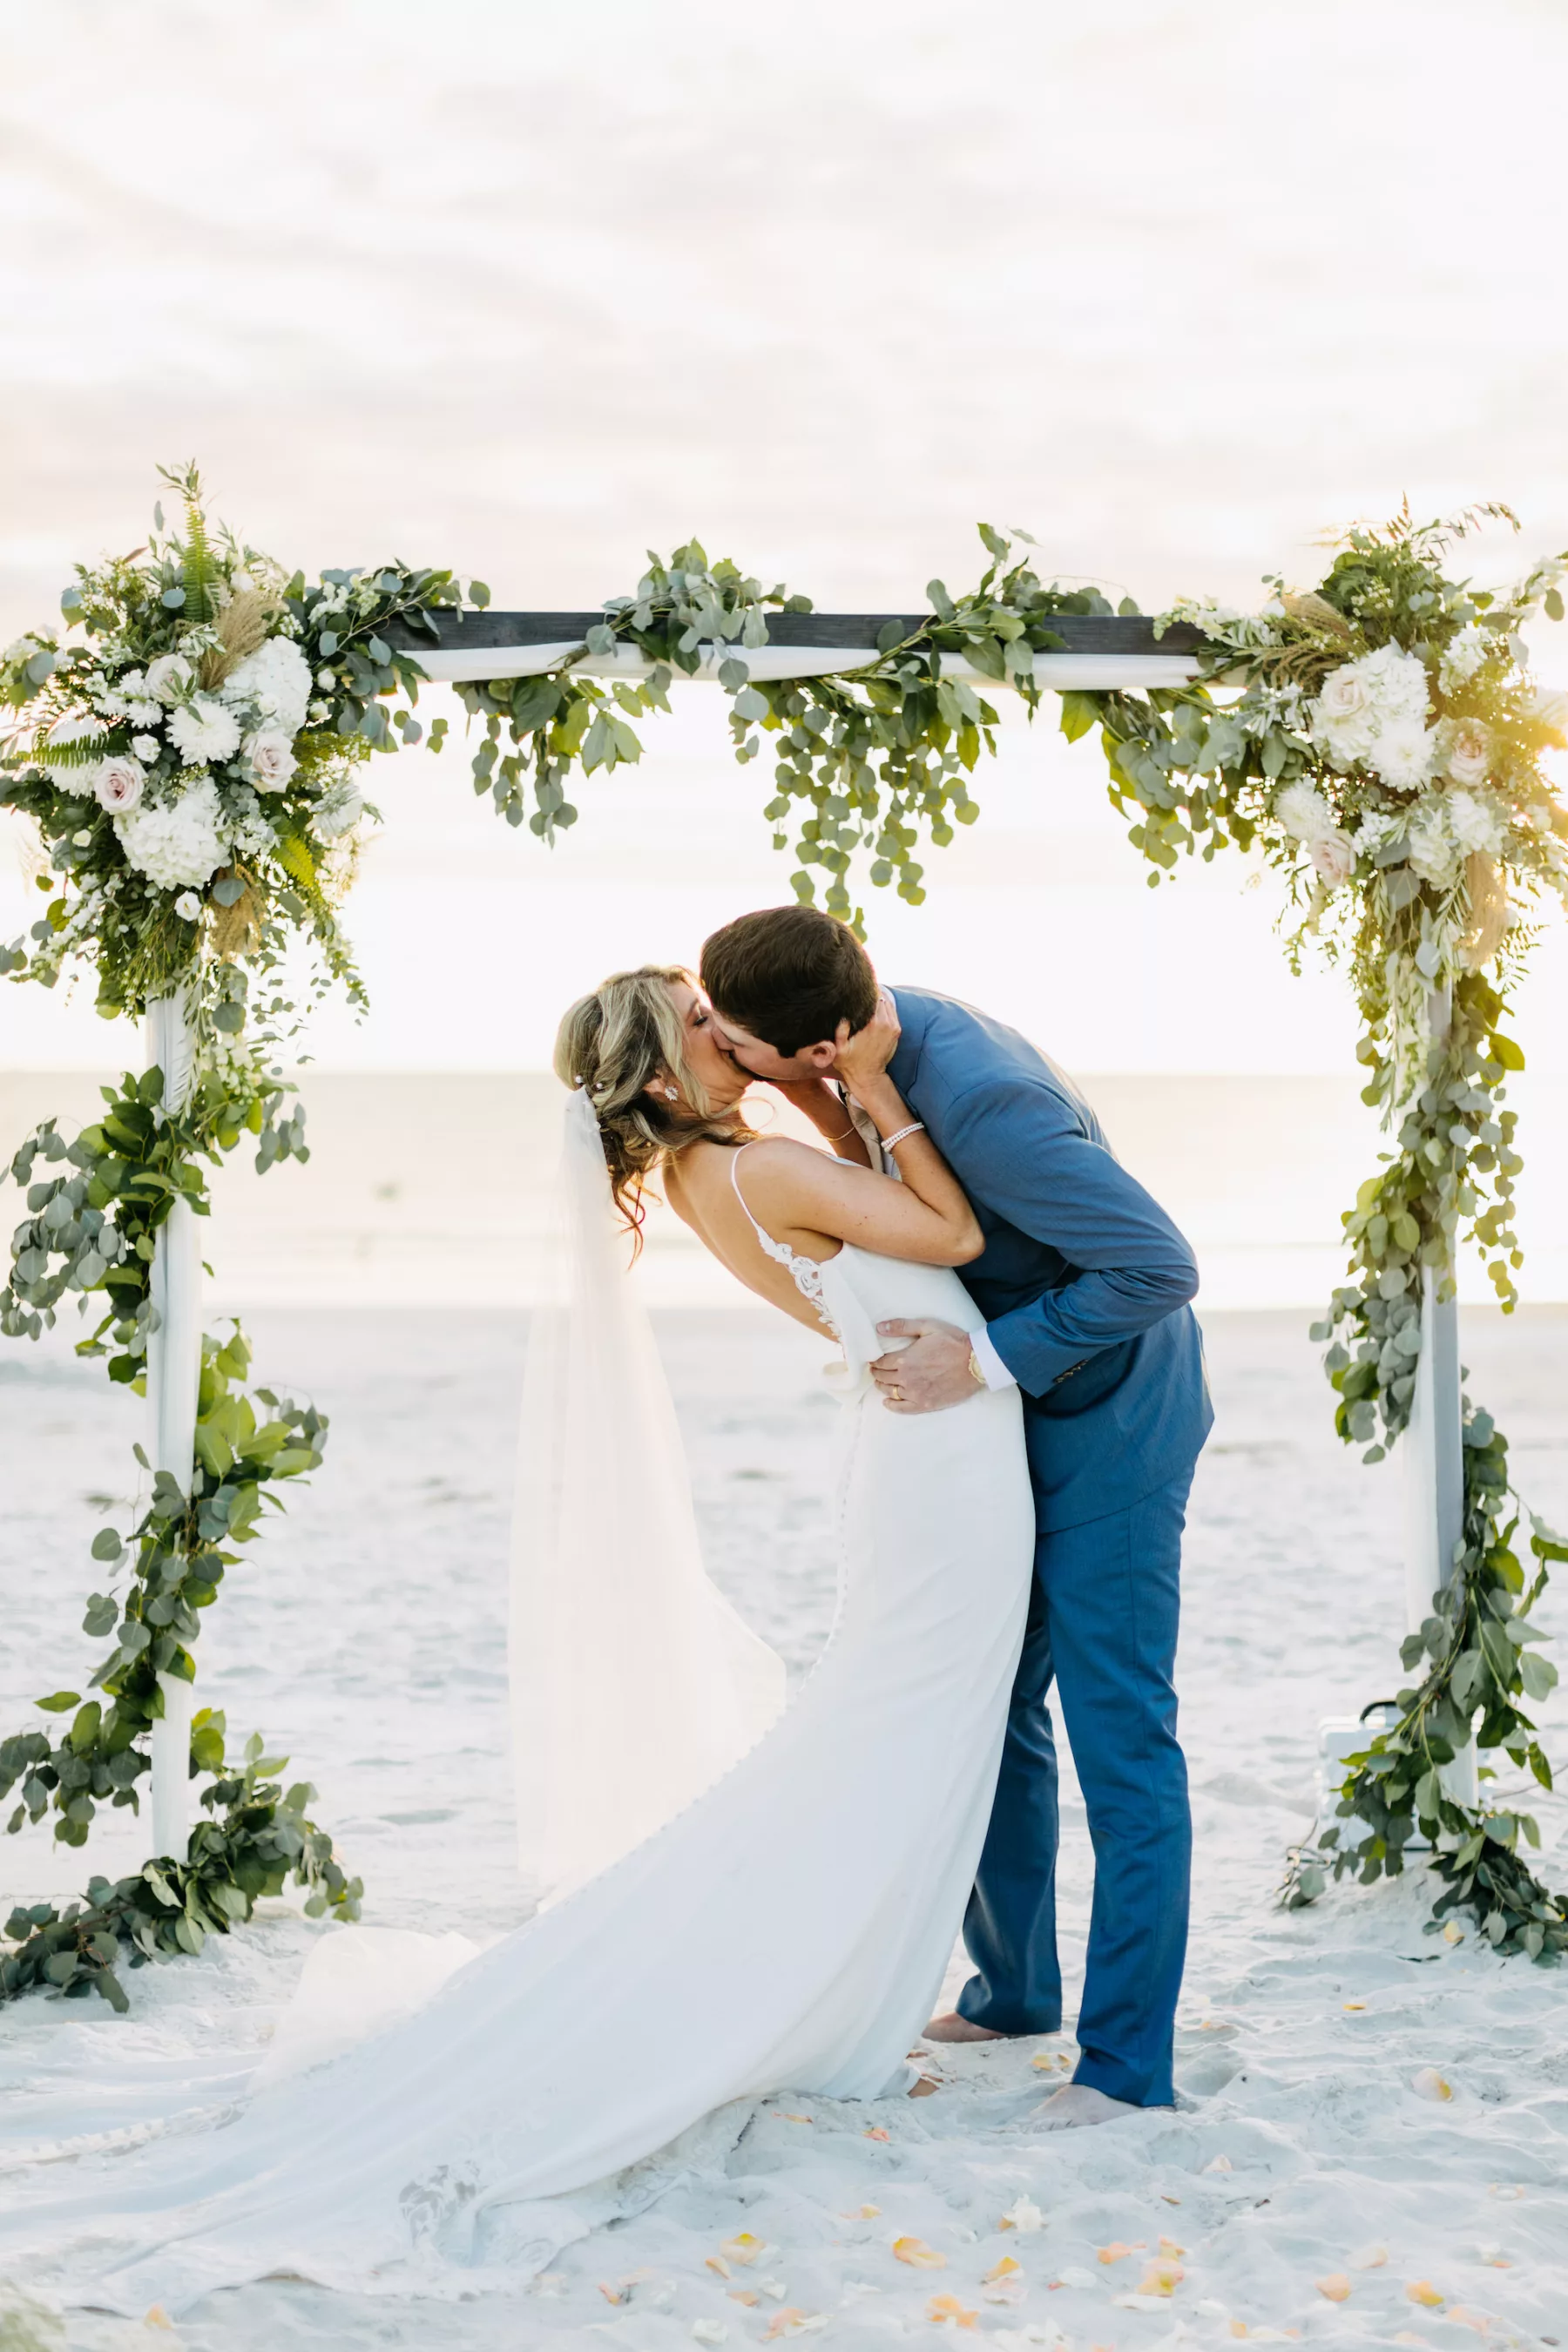 Bride and Groom First Kiss Beach Wedding Portrait | Boho White Arbor with Wrapped Greenery Garland and White Roses | Tampa Bay Videographer Priceless Studio Design | Madeira Beach Photographer Amber McWhorter Photography | Videographer Priceless Studio Design